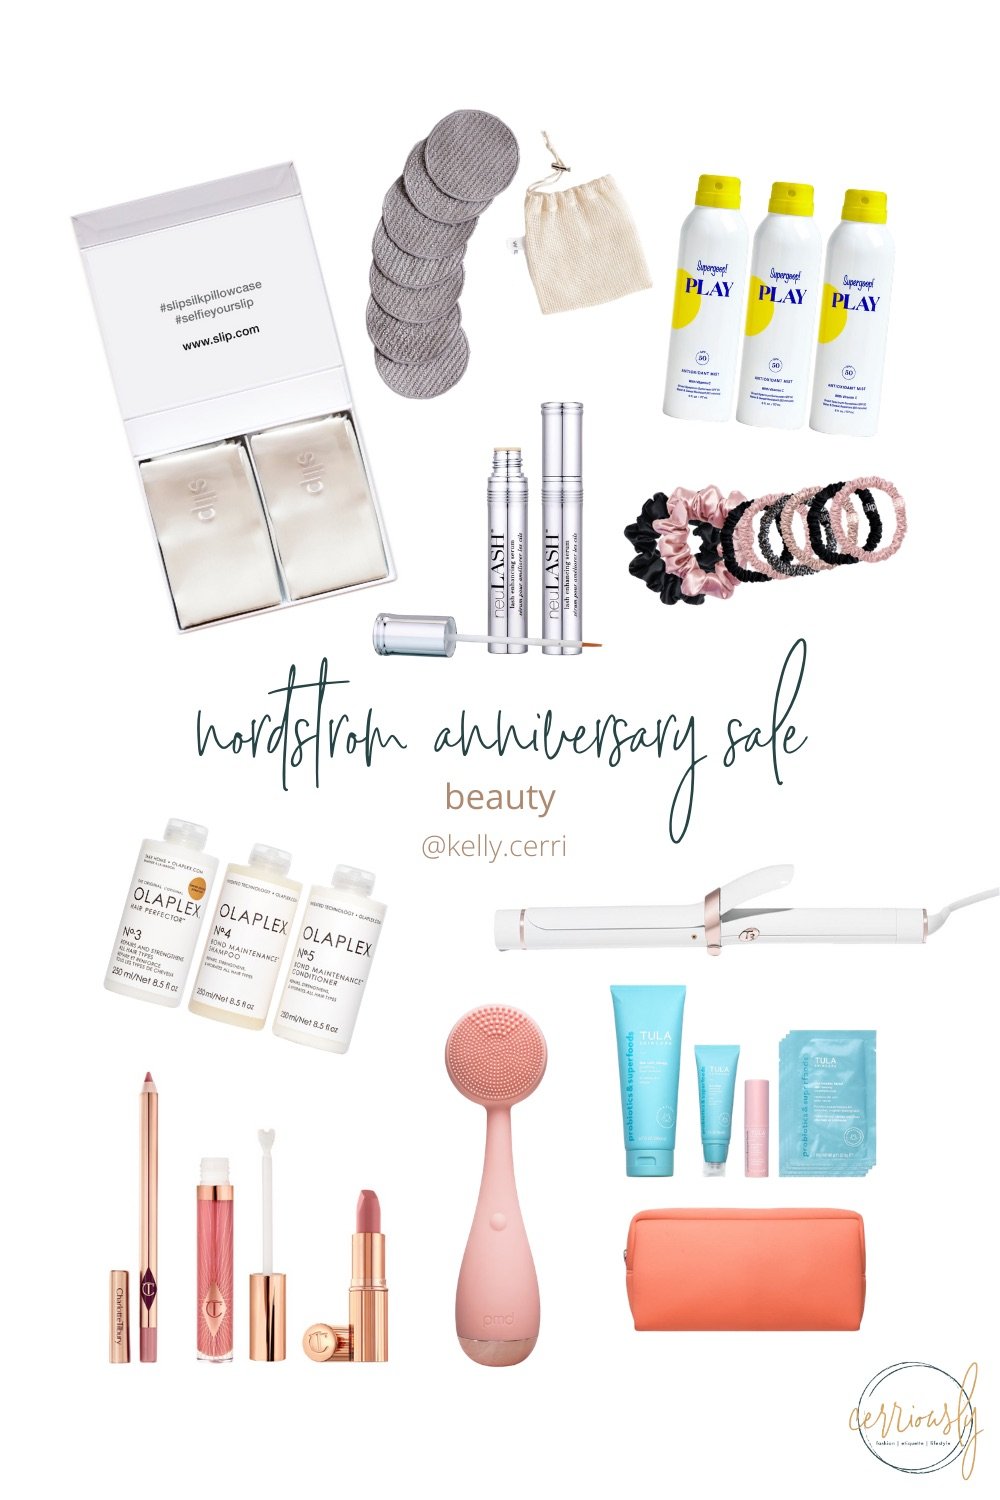 nordstrom anniversary sale finds - beauty